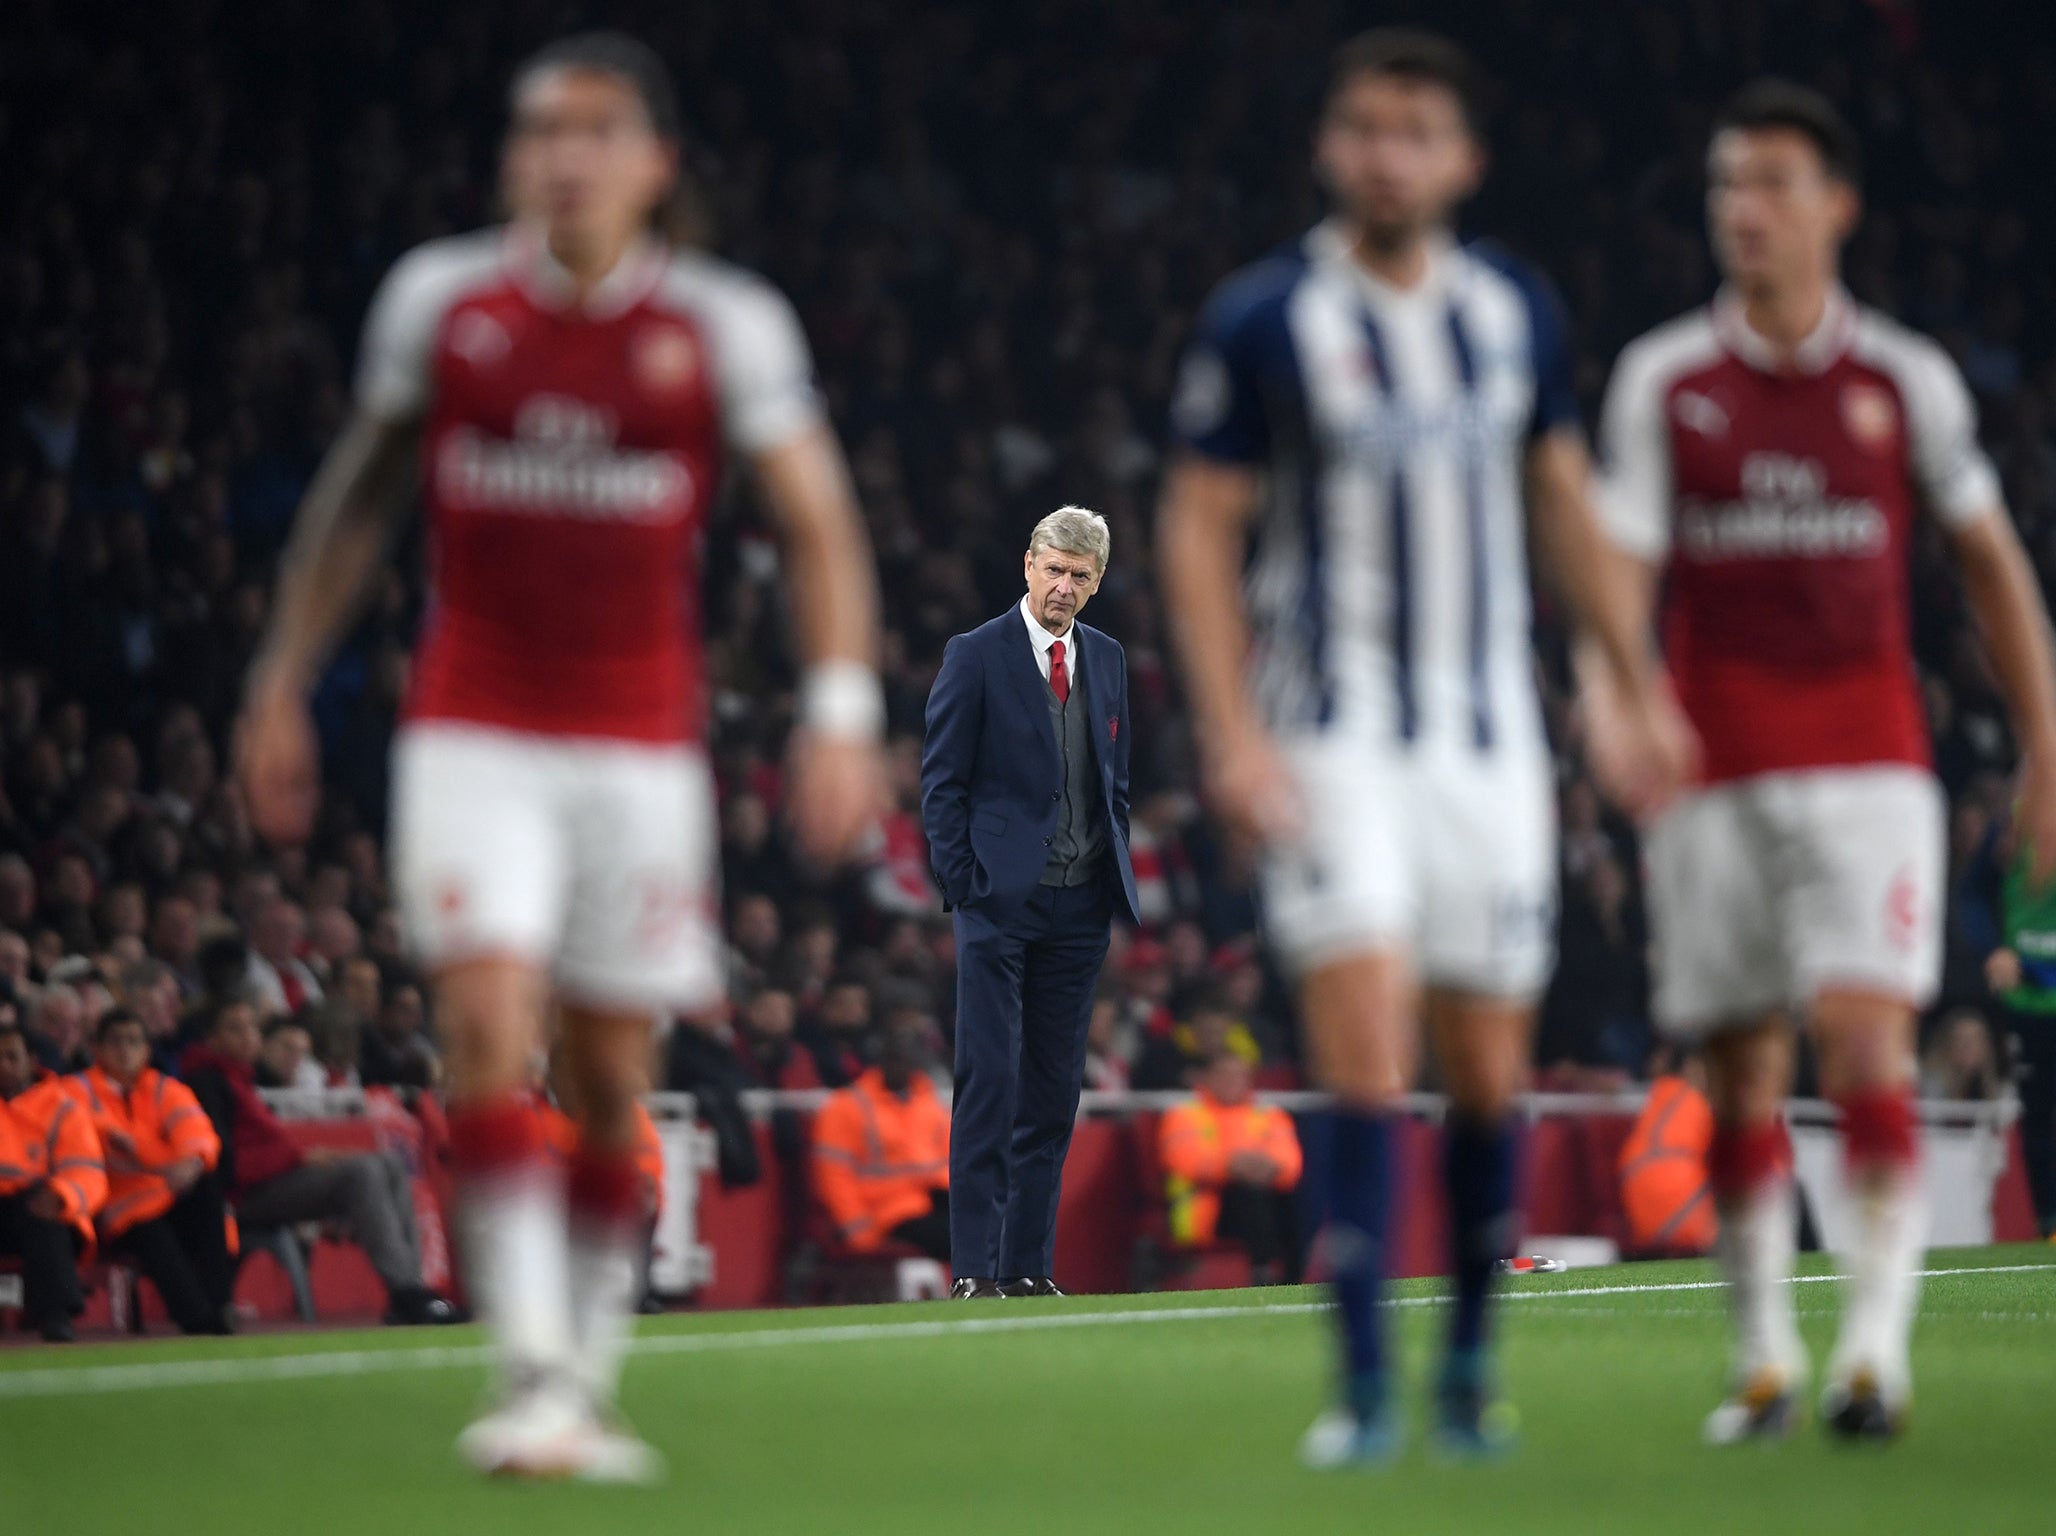 The protests against Wenger have quietened - for now